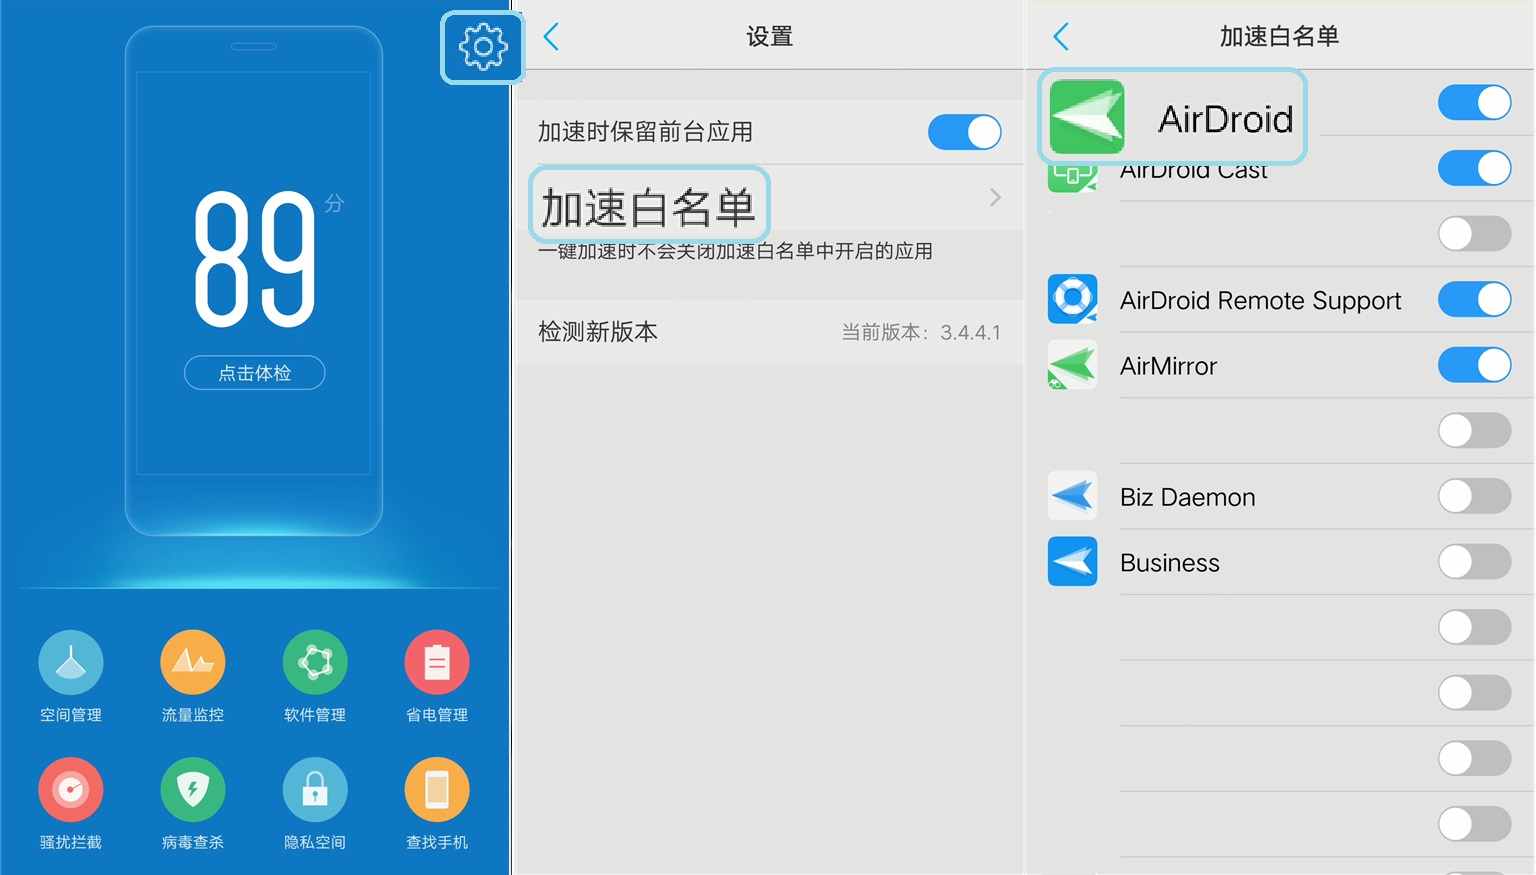 cn_-_Android_5.1.1_-keep_AirDroid_running_on_vivo_-2.jpg